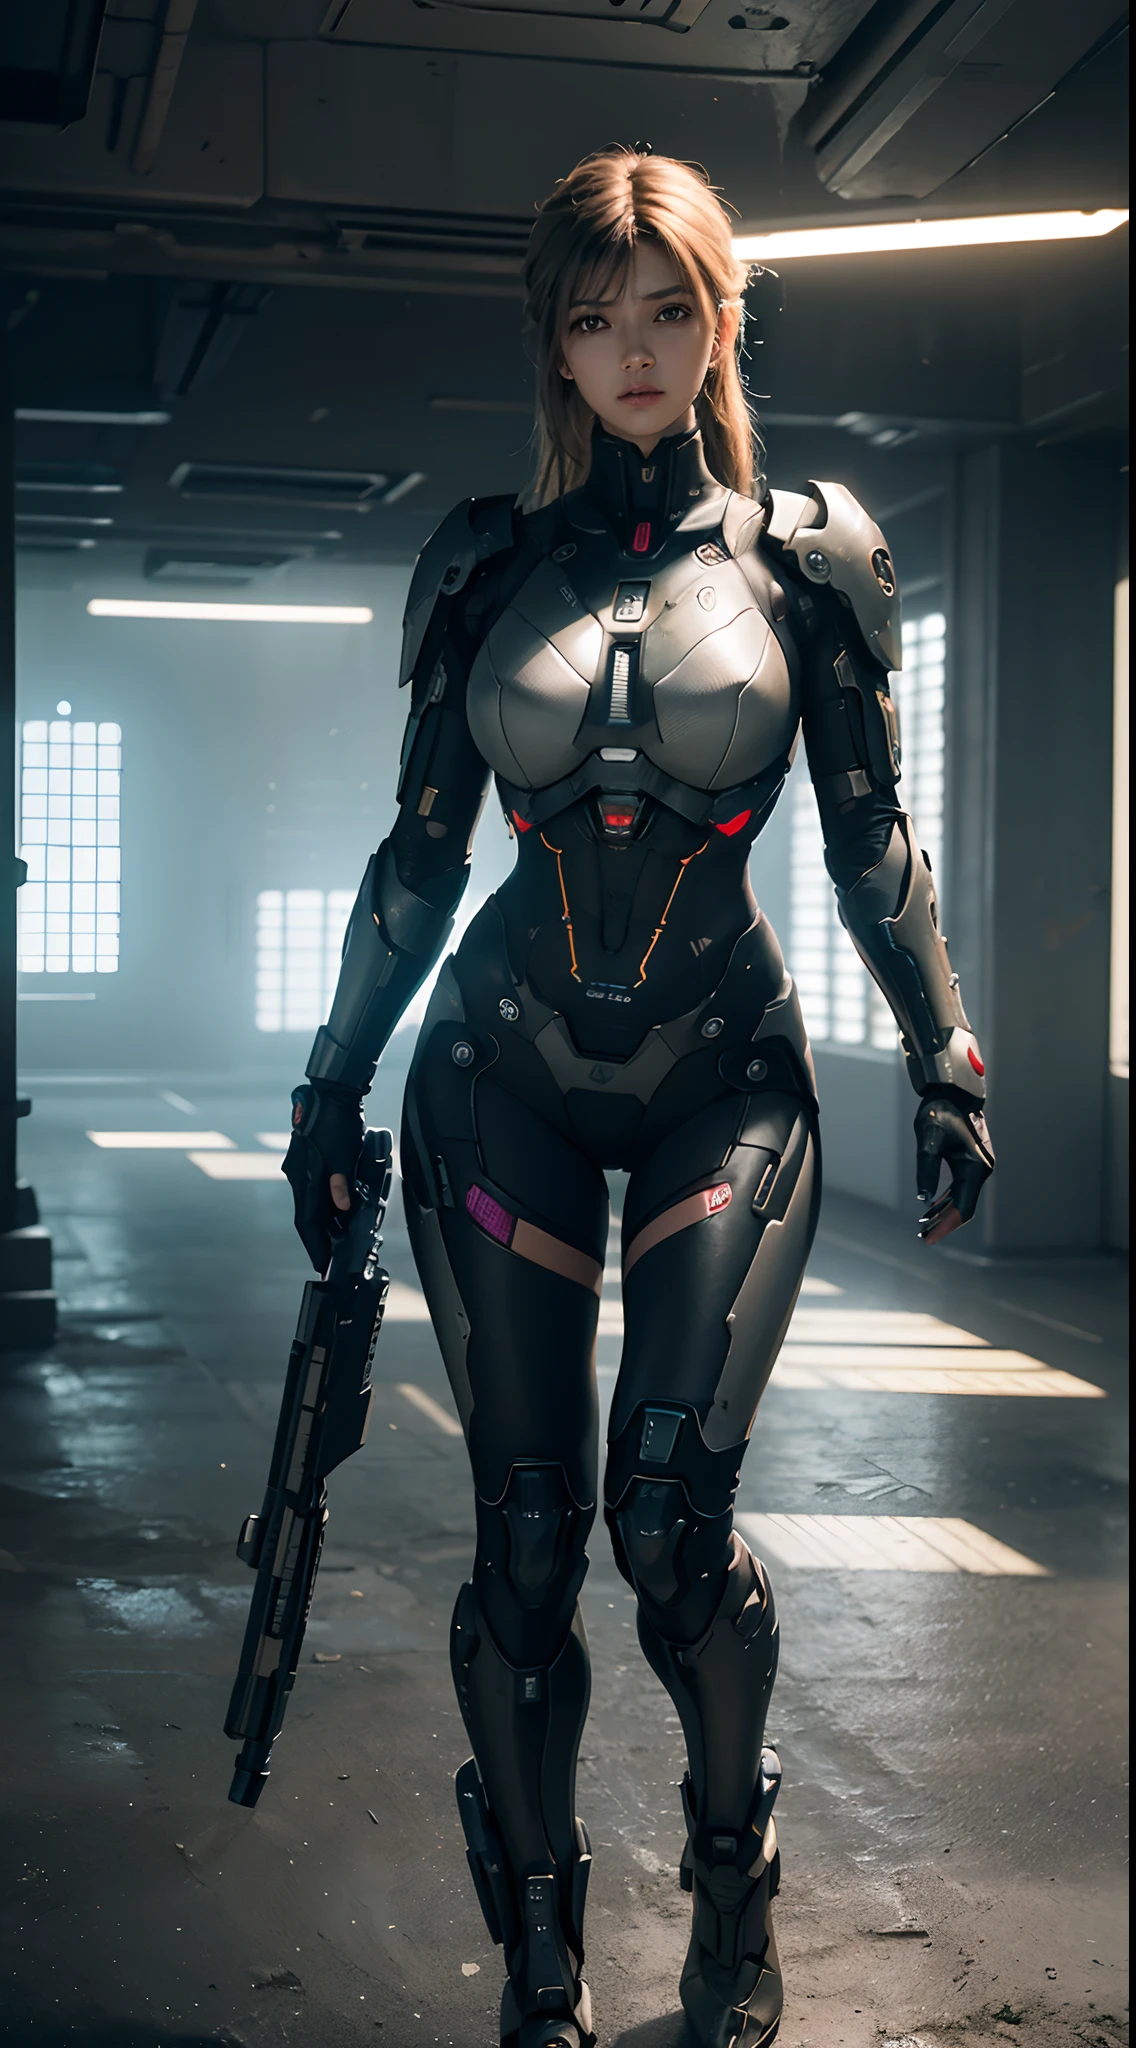 ((Best quality)), ((masterpiece)), (detailed:1.4), 3D, an image of a cyberpunk cyborg,halo 3, HDR (High Dynamic Range),Ray Tracing,NVIDIA RTX,Super-Resolution,Unreal 5,Subsurface scattering,PBR Texturing,Post-processing,Anisotropic Filtering,Depth-of-field,Maximum clarity and sharpness,((Multi-layered textures)),Specular maps,Surface shading,Accurate simulation of light-material interaction,Perfect proportions,Octane Render,Two-tone lighting,Wide aperture,Low ISO, soft colour,Rule of thirds,8K RAW,